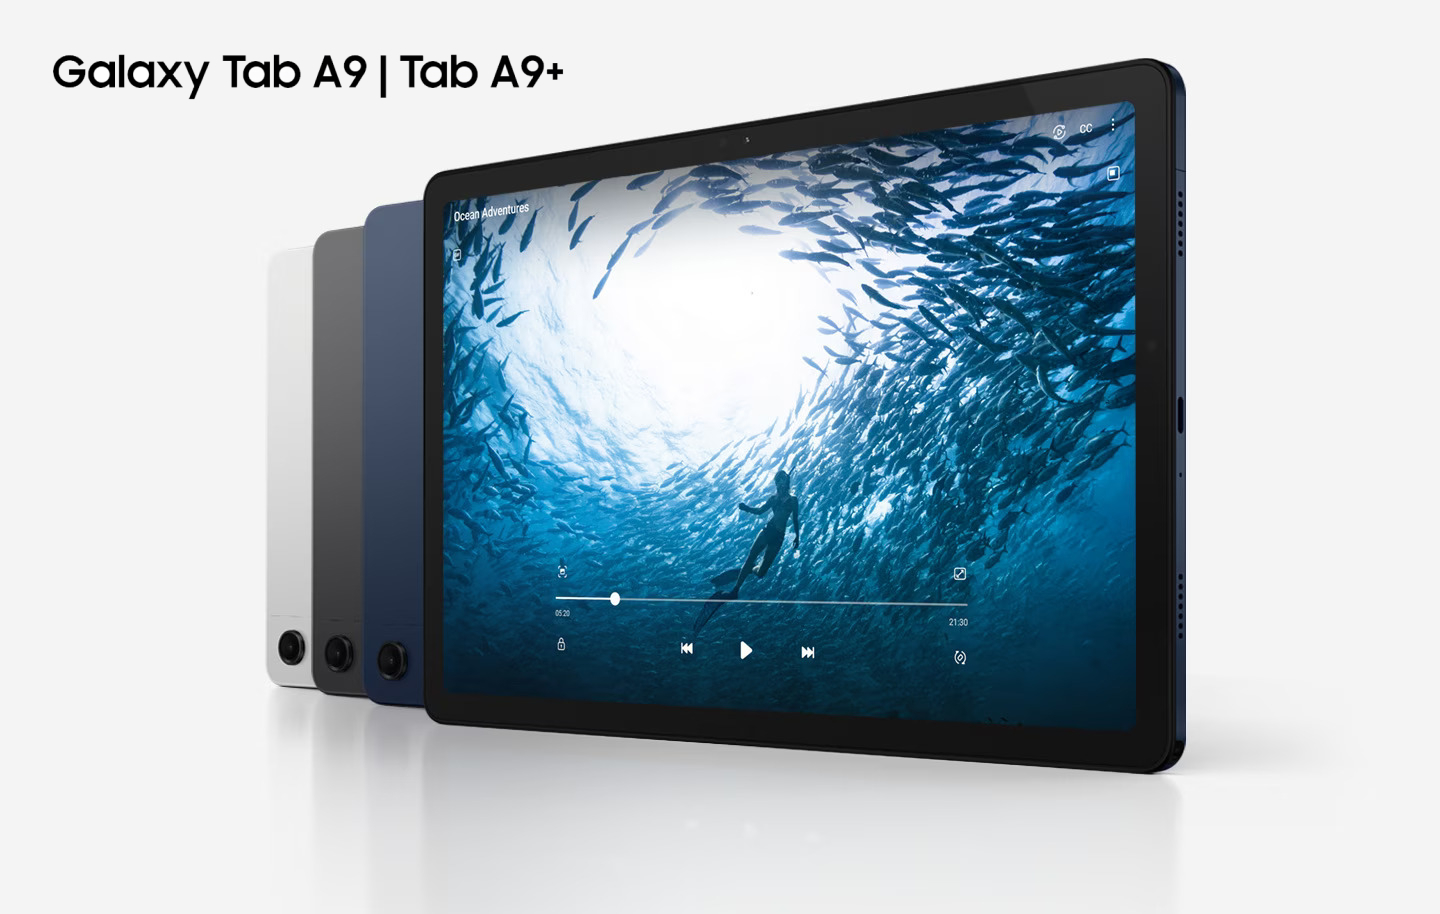 Samsung Galaxy Tab A9 and Tab A9+: Affordable tablet with an 8.7-inch display launched in Nepal